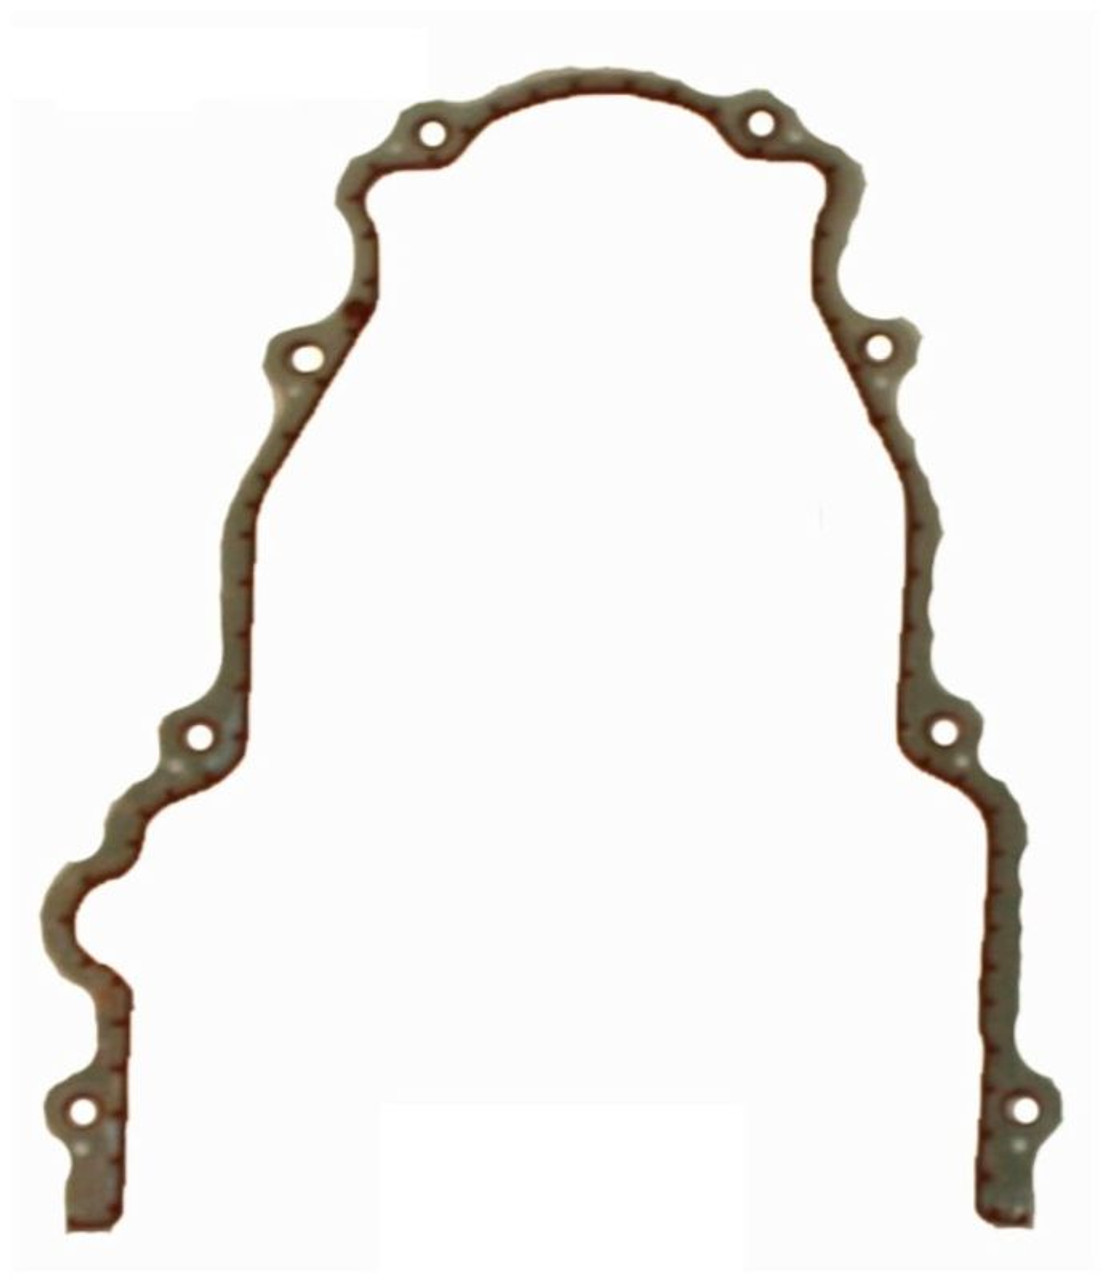 2015 Chevrolet Express 2500 4.8L Engine Timing Cover Gasket TCG293-A -902